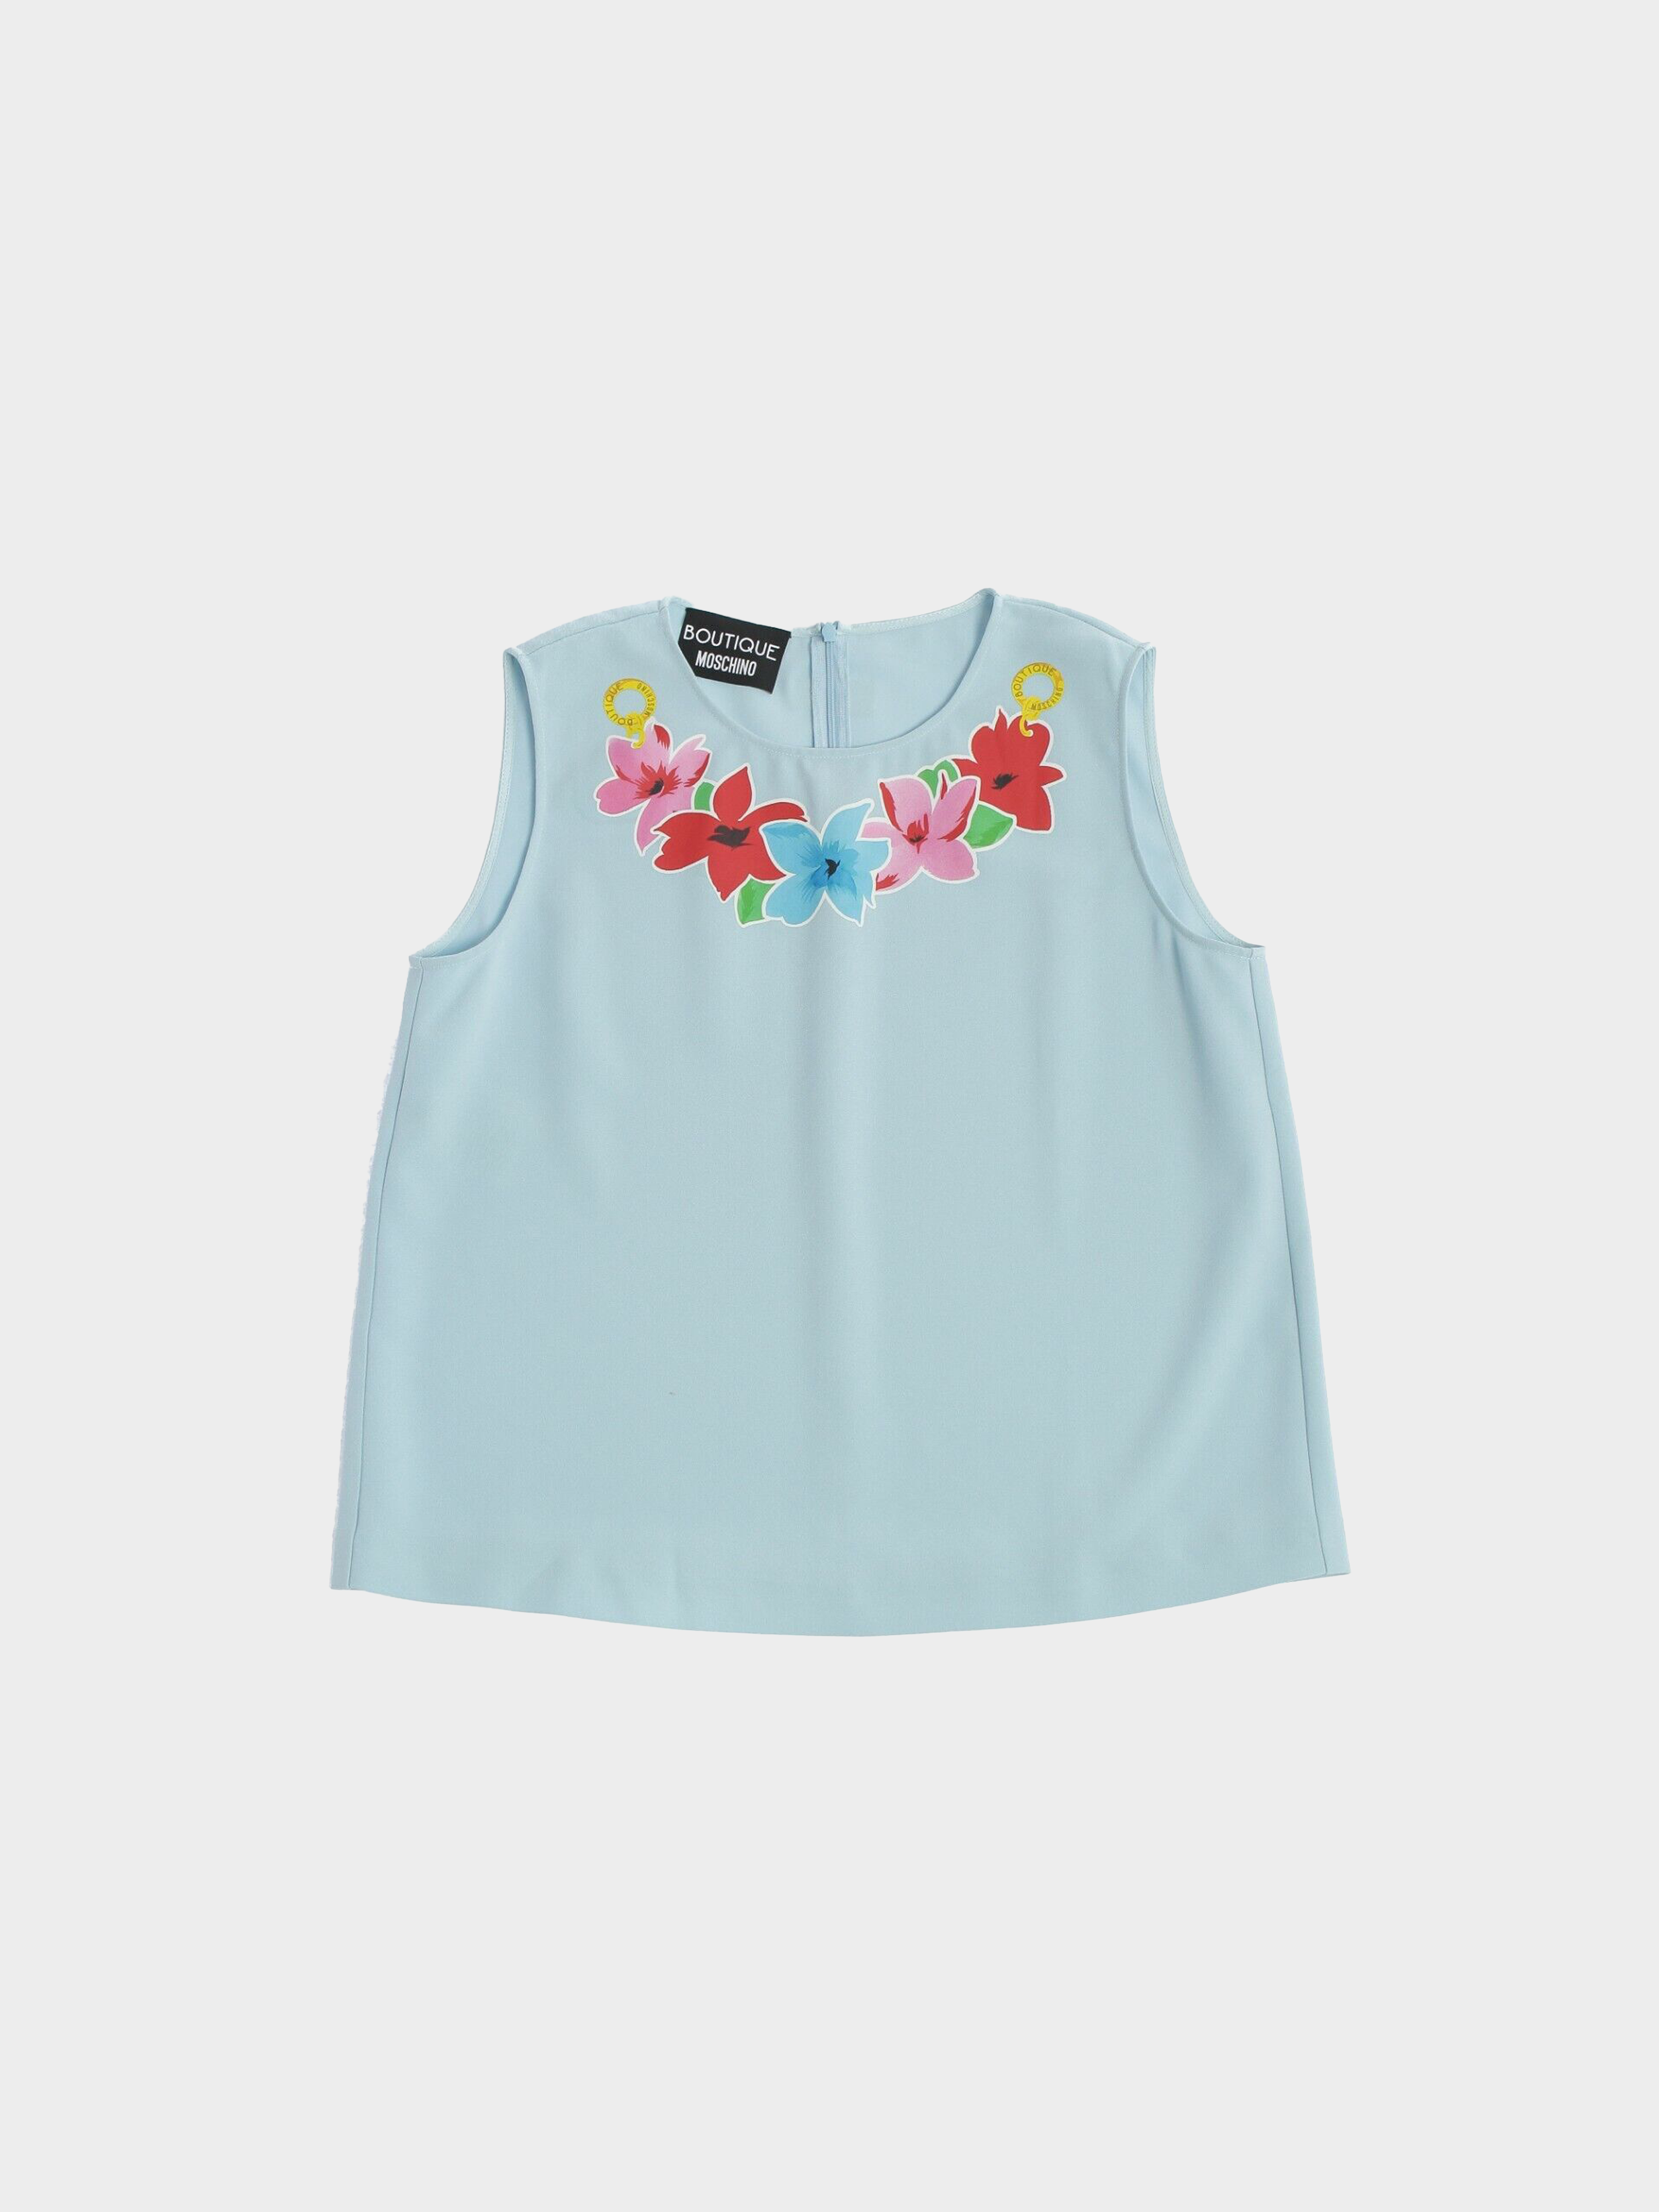 Moschino Boutique 2010s Floral Printed Summer Blouse Shirt Top